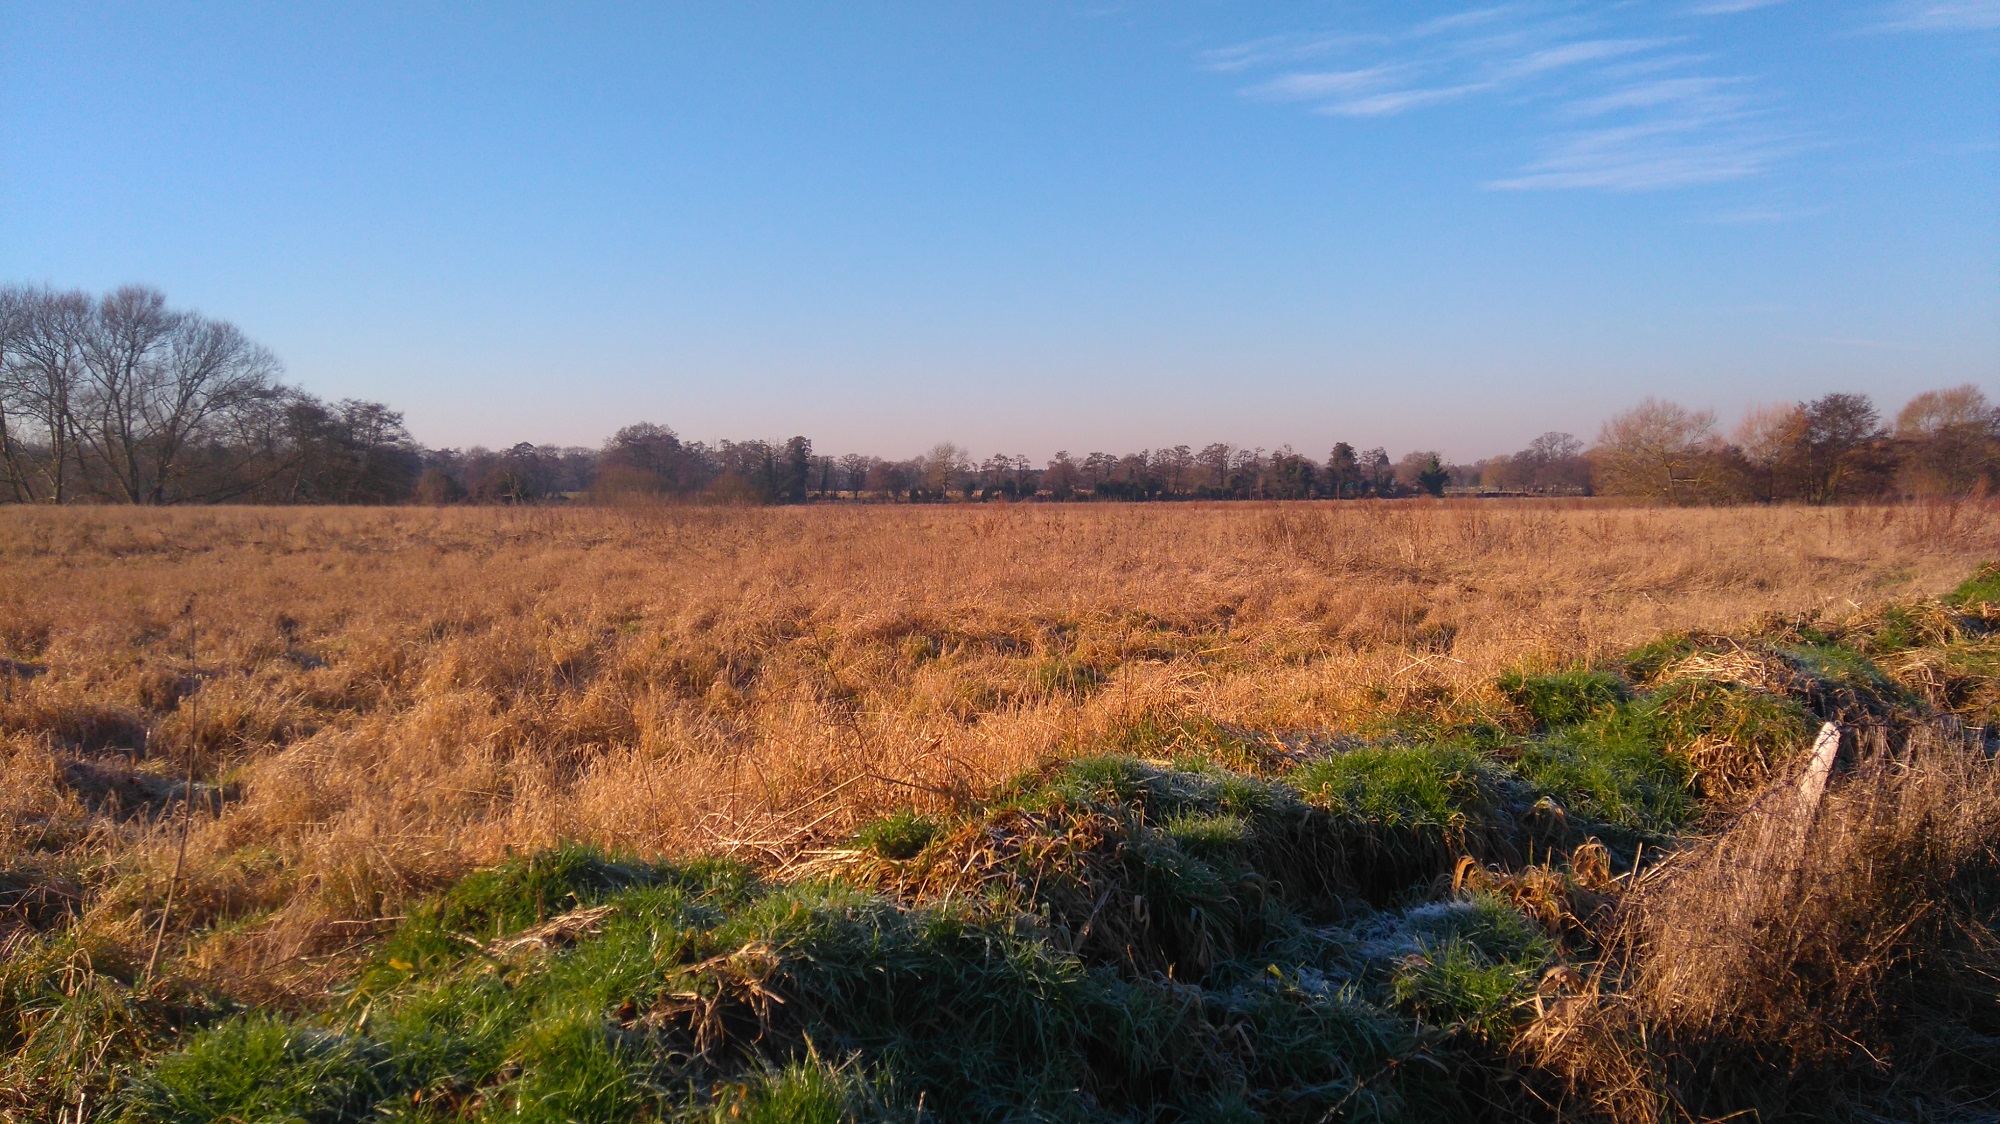 A large, low-lying flat meadow bathed in winter sunlight under clear azure skies, with trees in the distance. In the foreground a small area of shade is covered in frost.